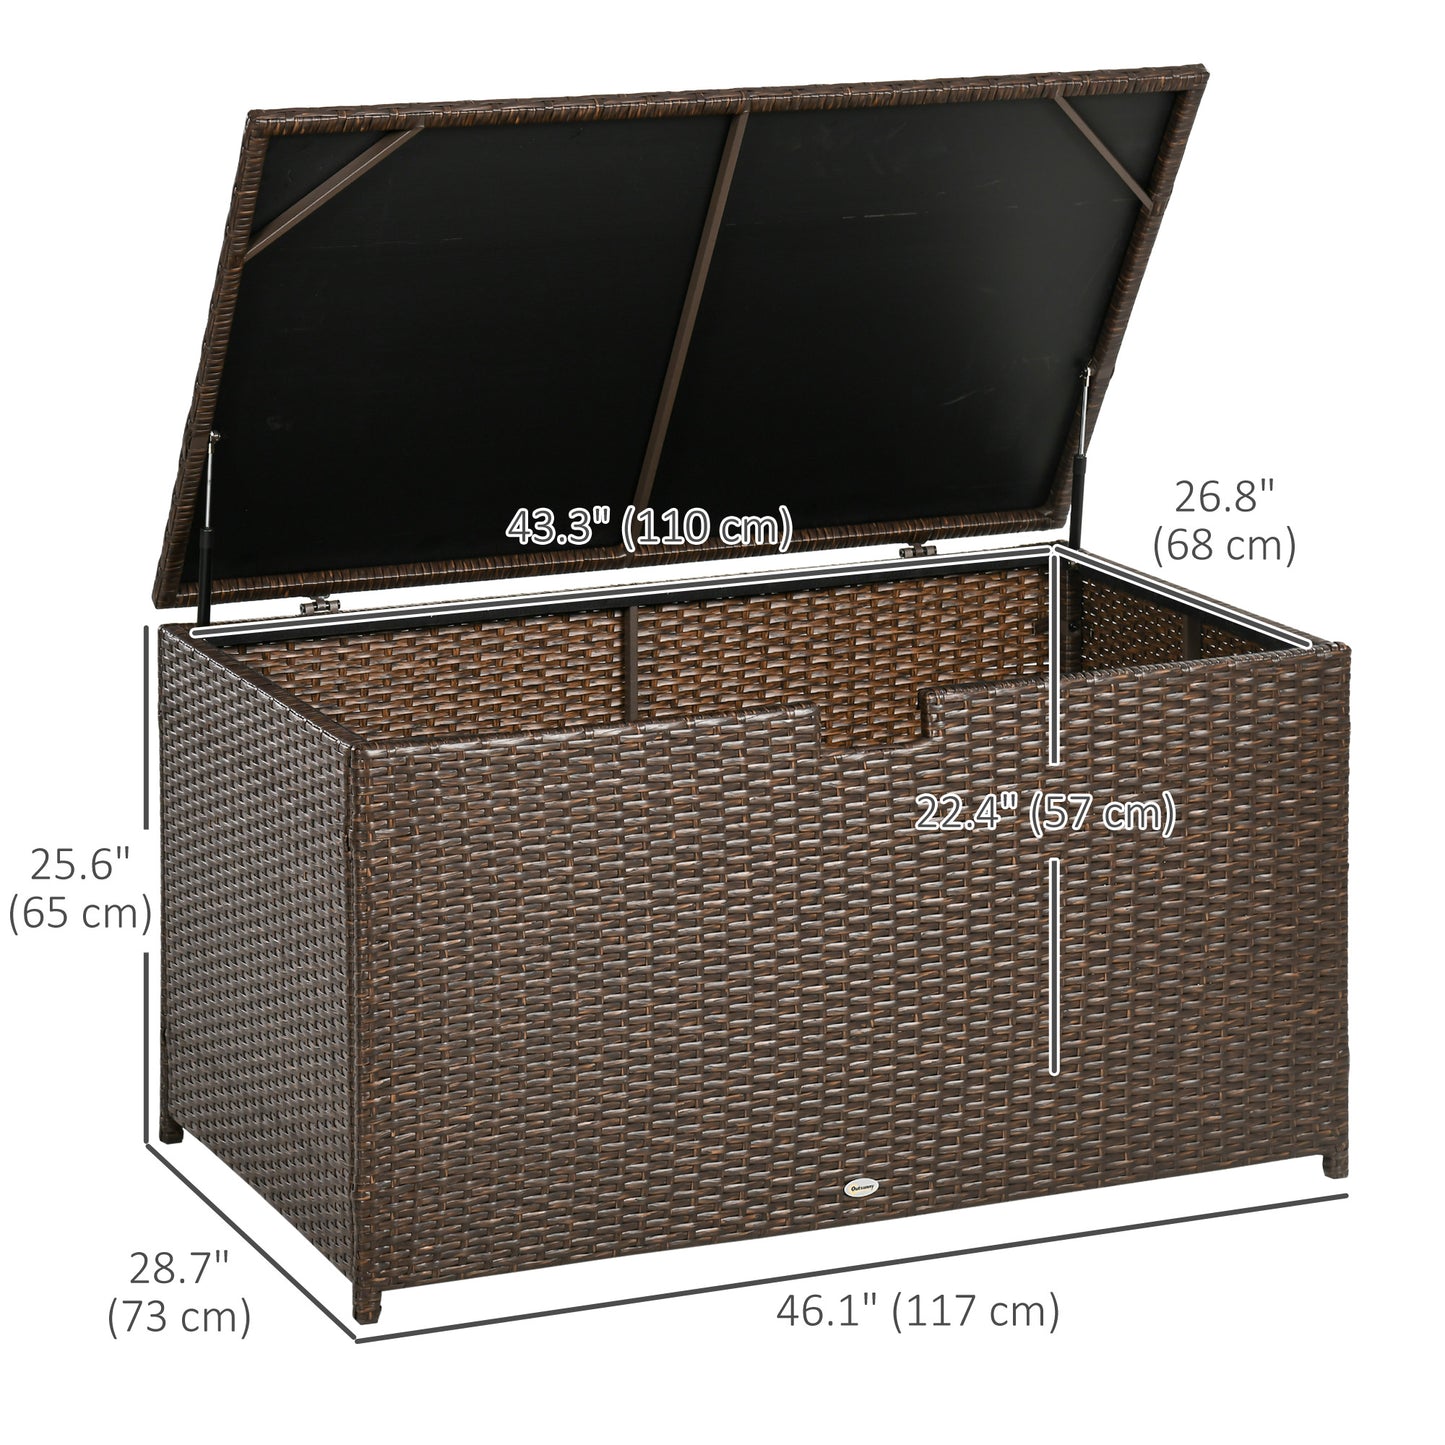 Outsunny 113 Gallon Outdoor Storage Box, Rattan Deck Box for Indoor, Patio Furniture Cushions, Pool Toys, Garden Tools, Brown